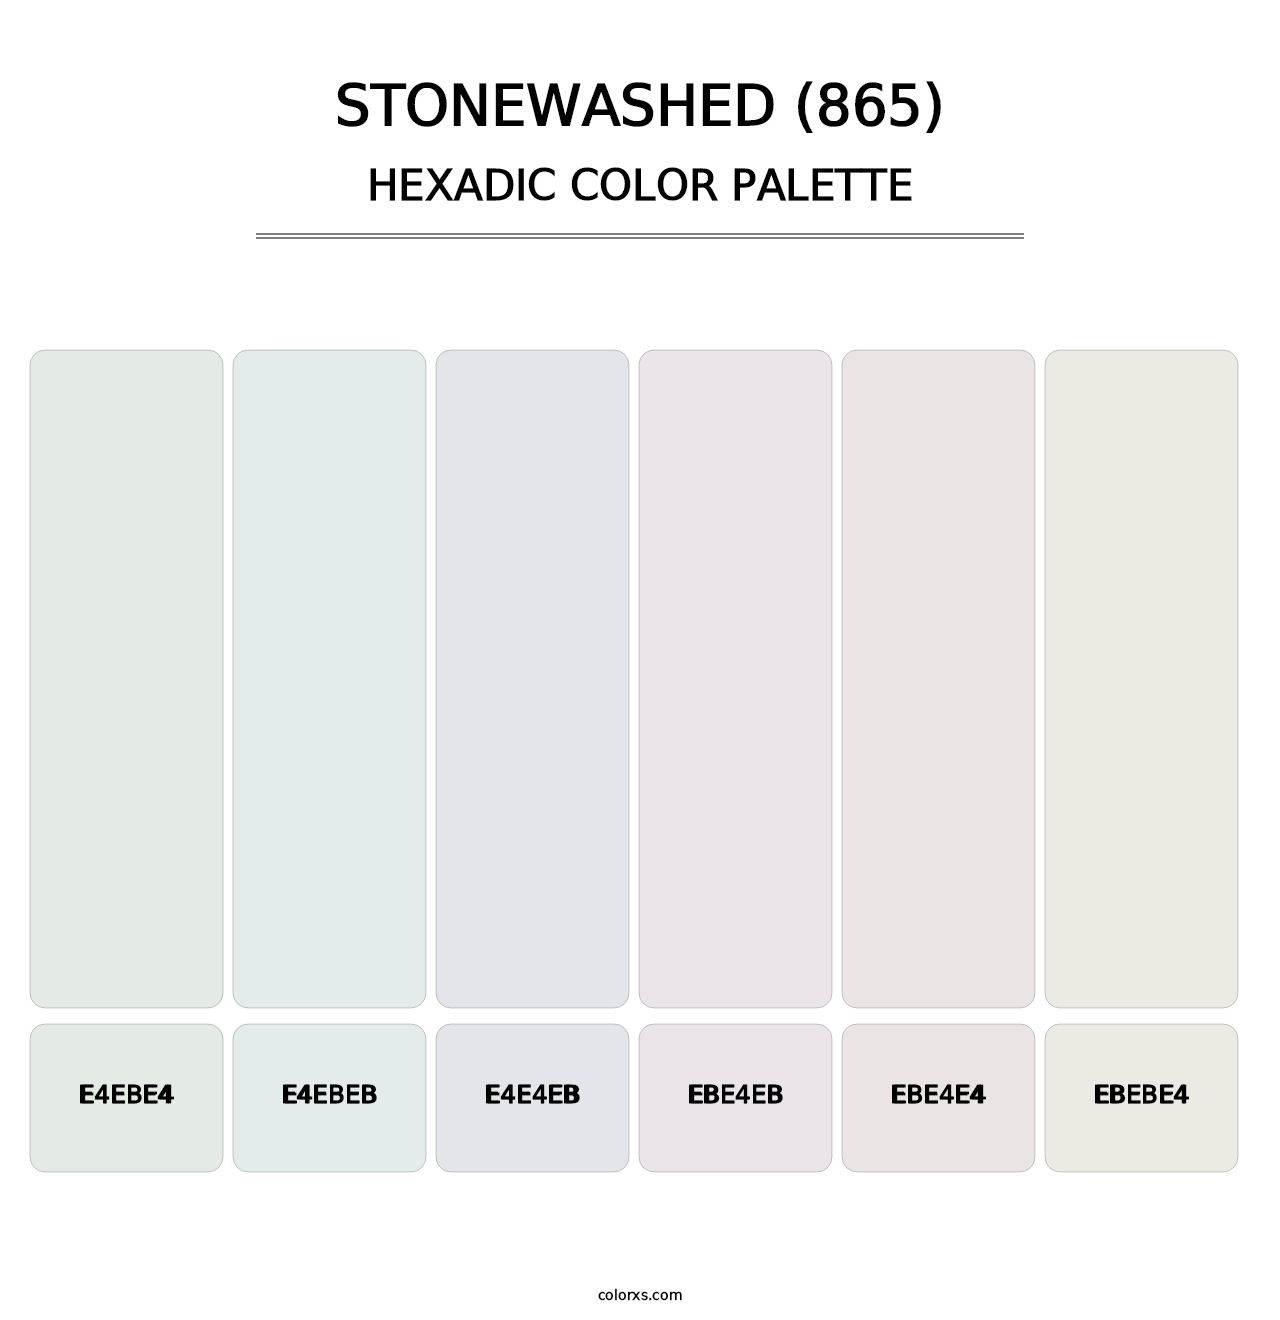 Stonewashed (865) - Hexadic Color Palette